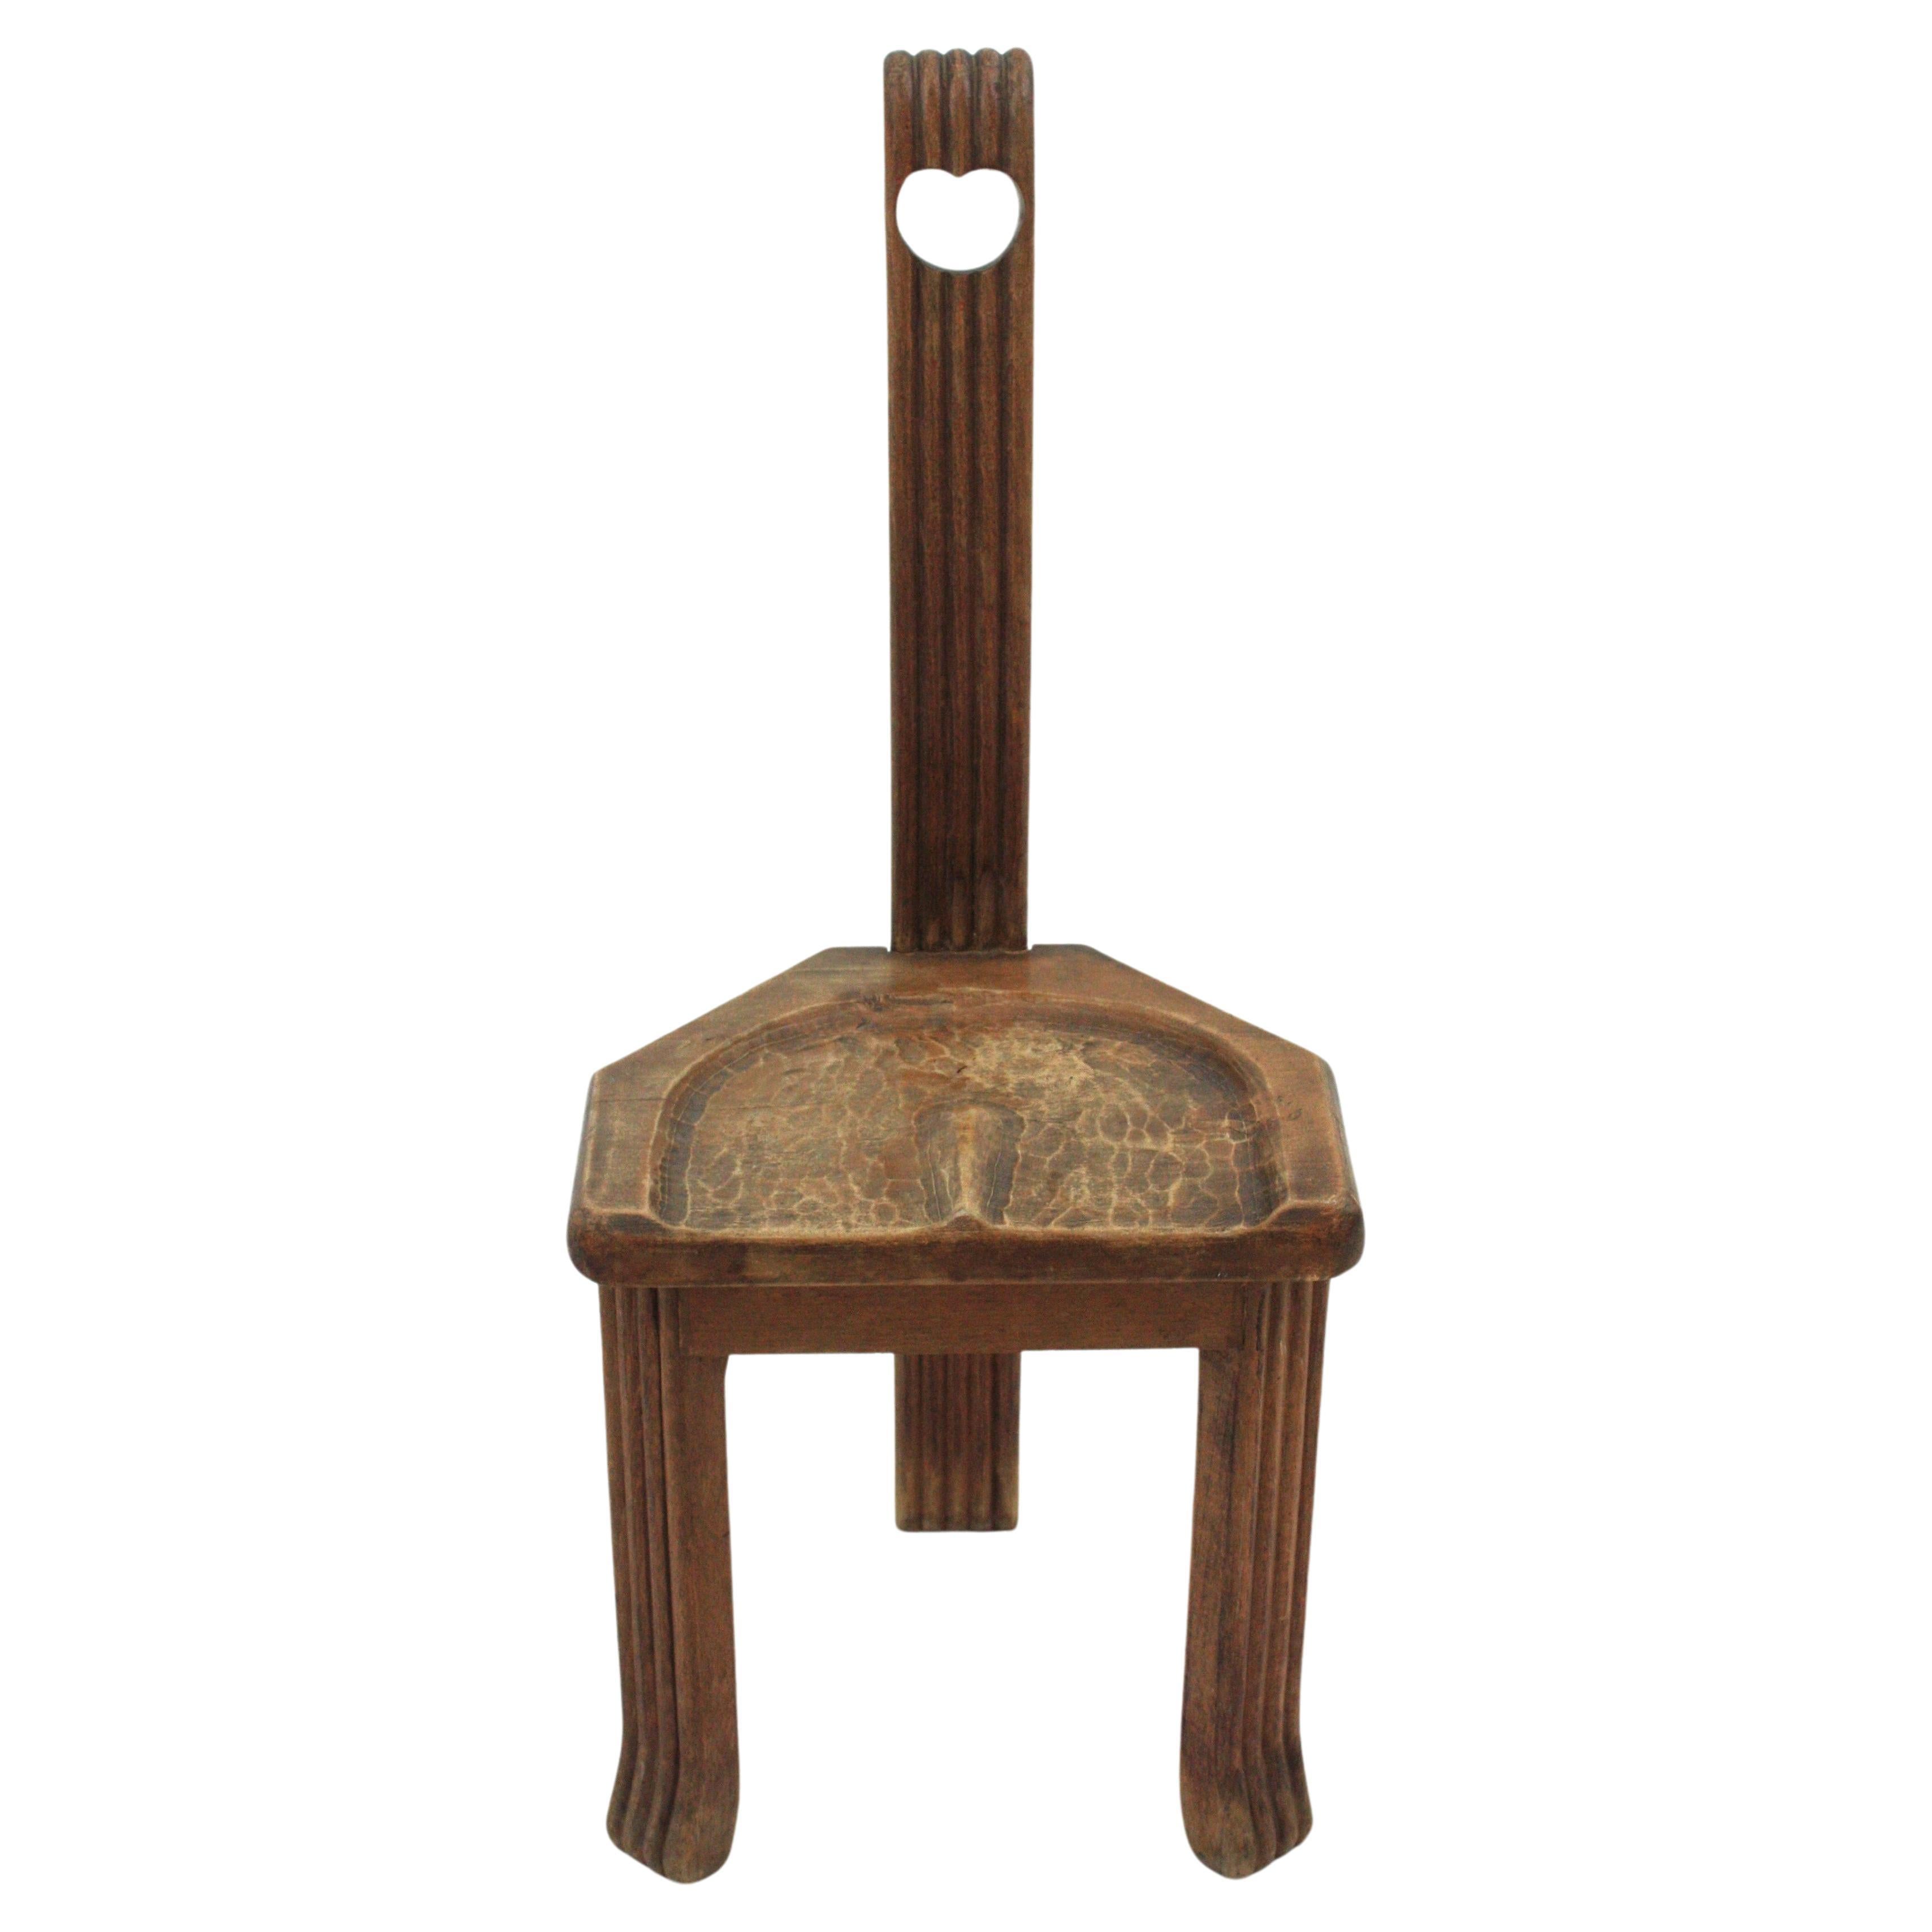 Hand-Crafted French Brutalist Wood Side Table Tripod Stool with High Backrest, 1950s For Sale